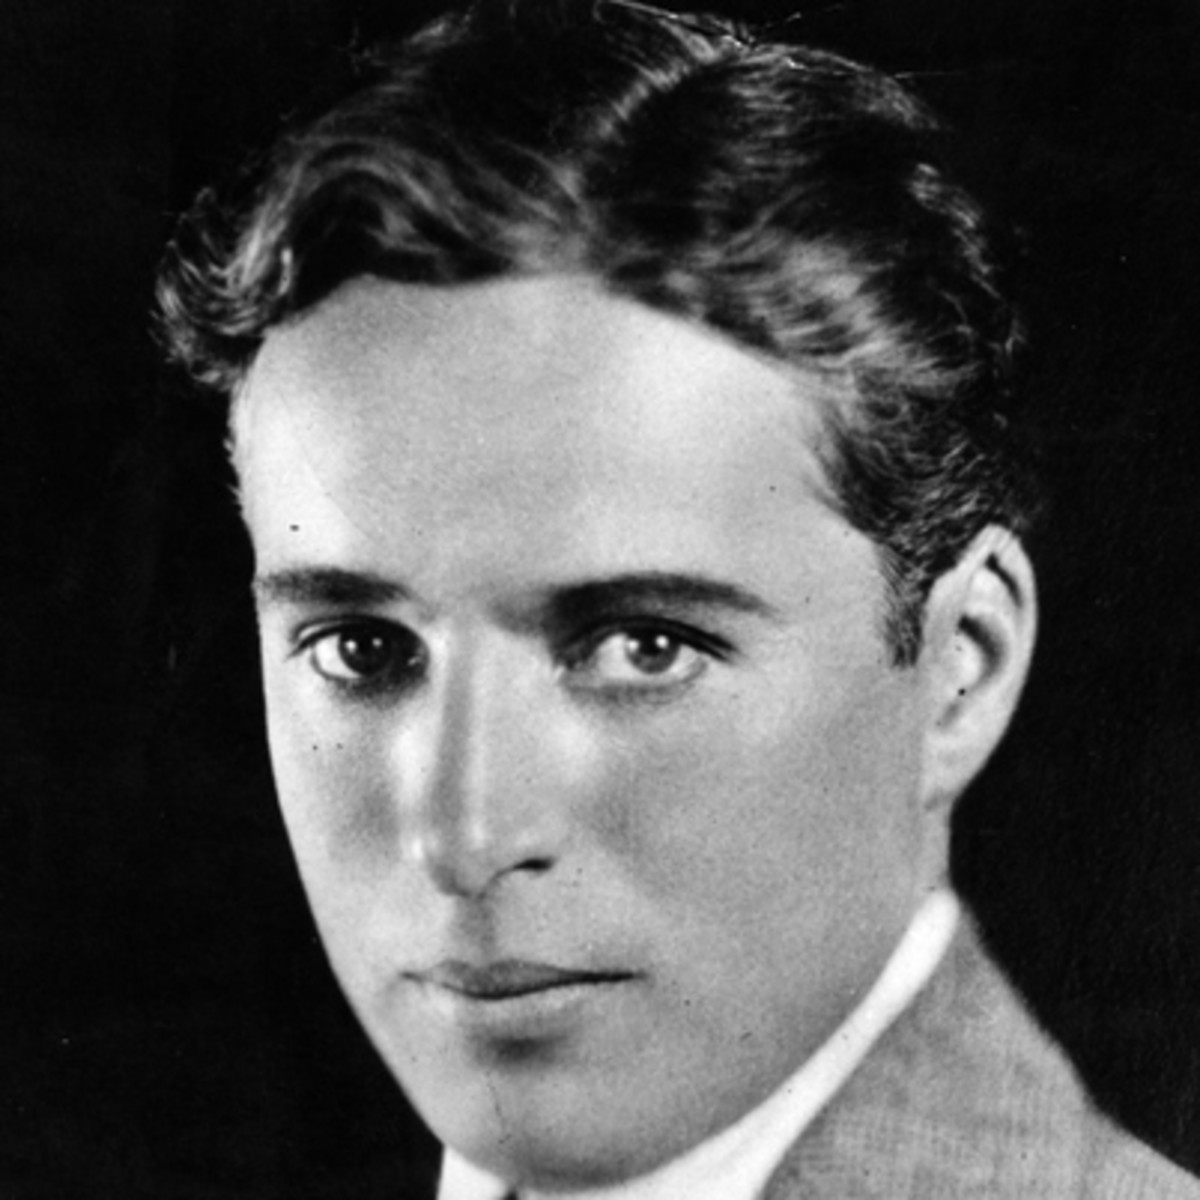 Chaplin young, and without his general getup